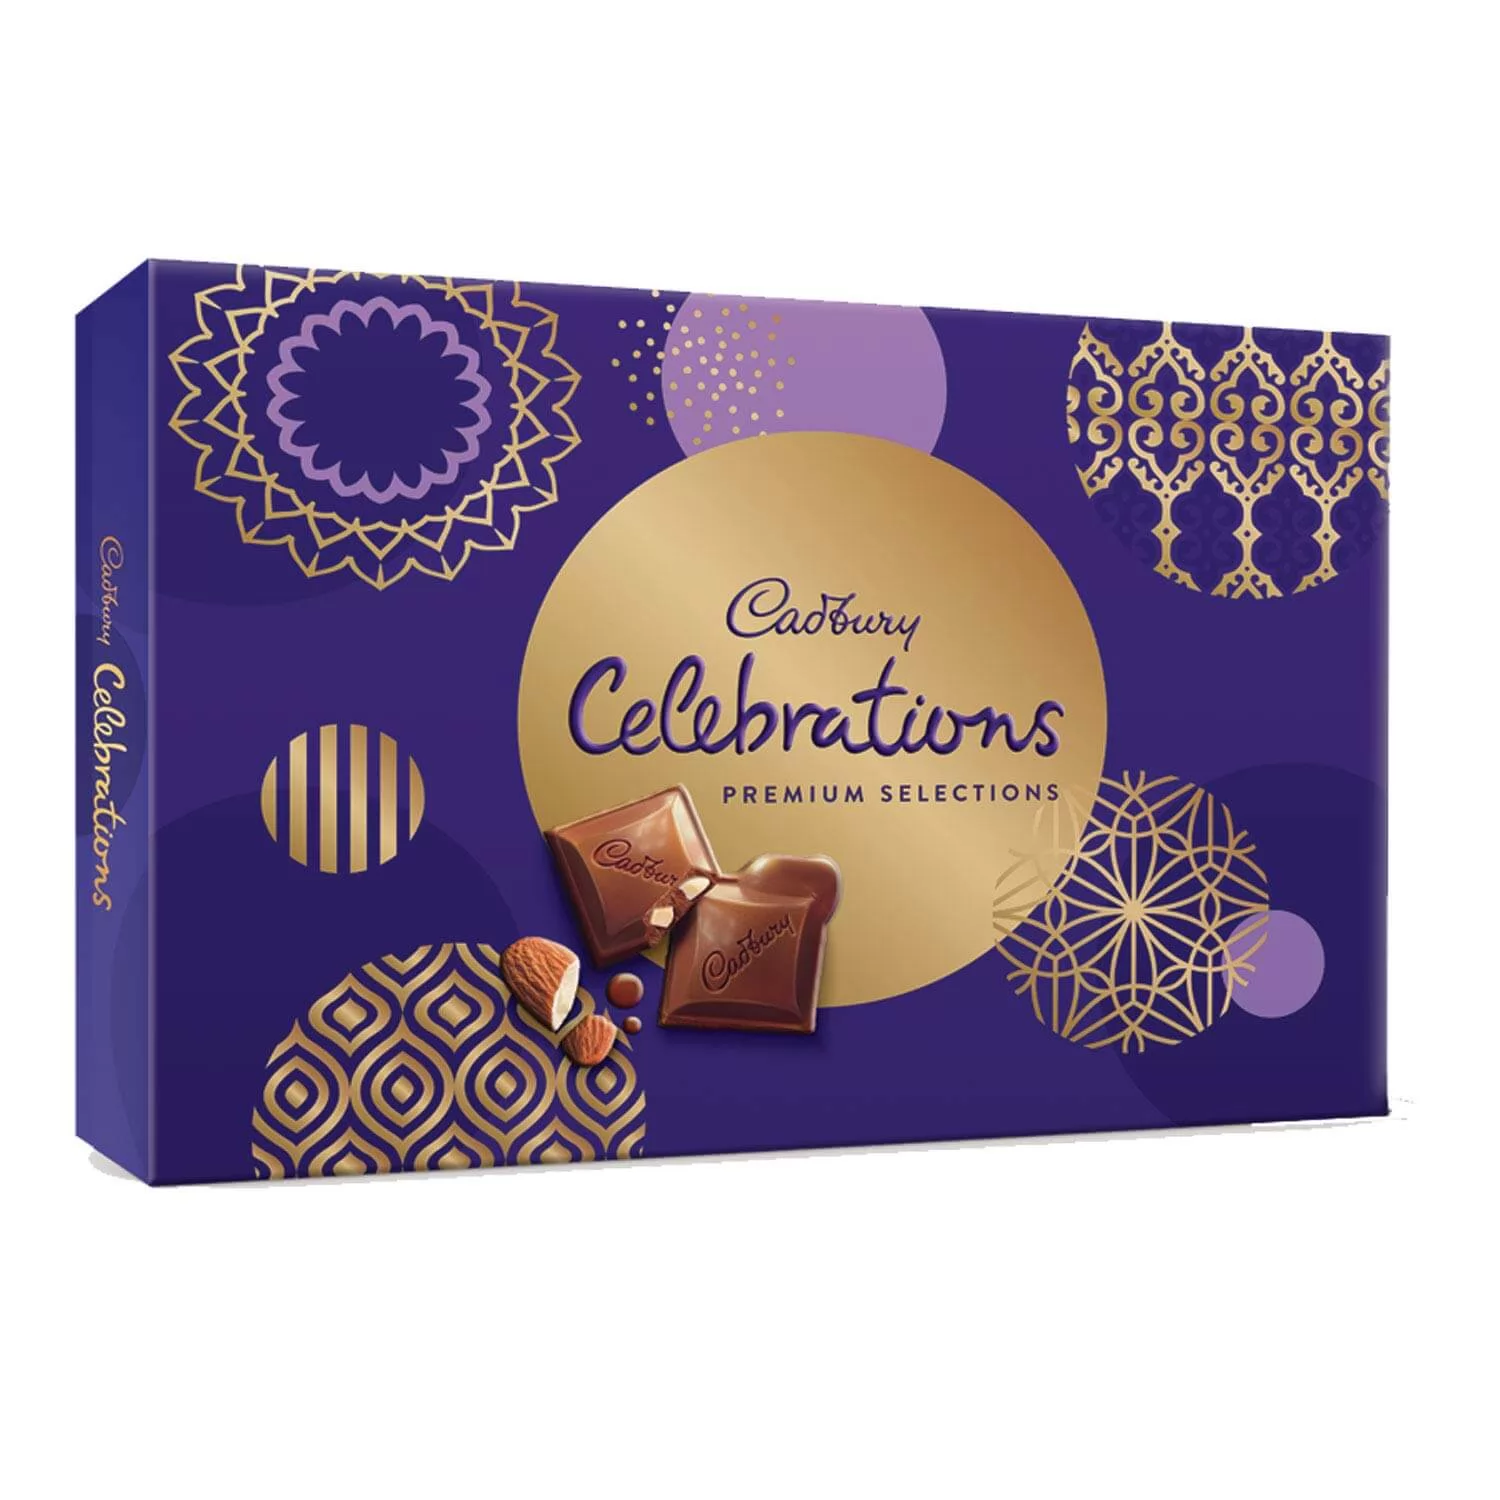 Cadbury 5 Star Chocolate Filled Bar - Pack of 3 Price - Buy Online at ₹56  in India